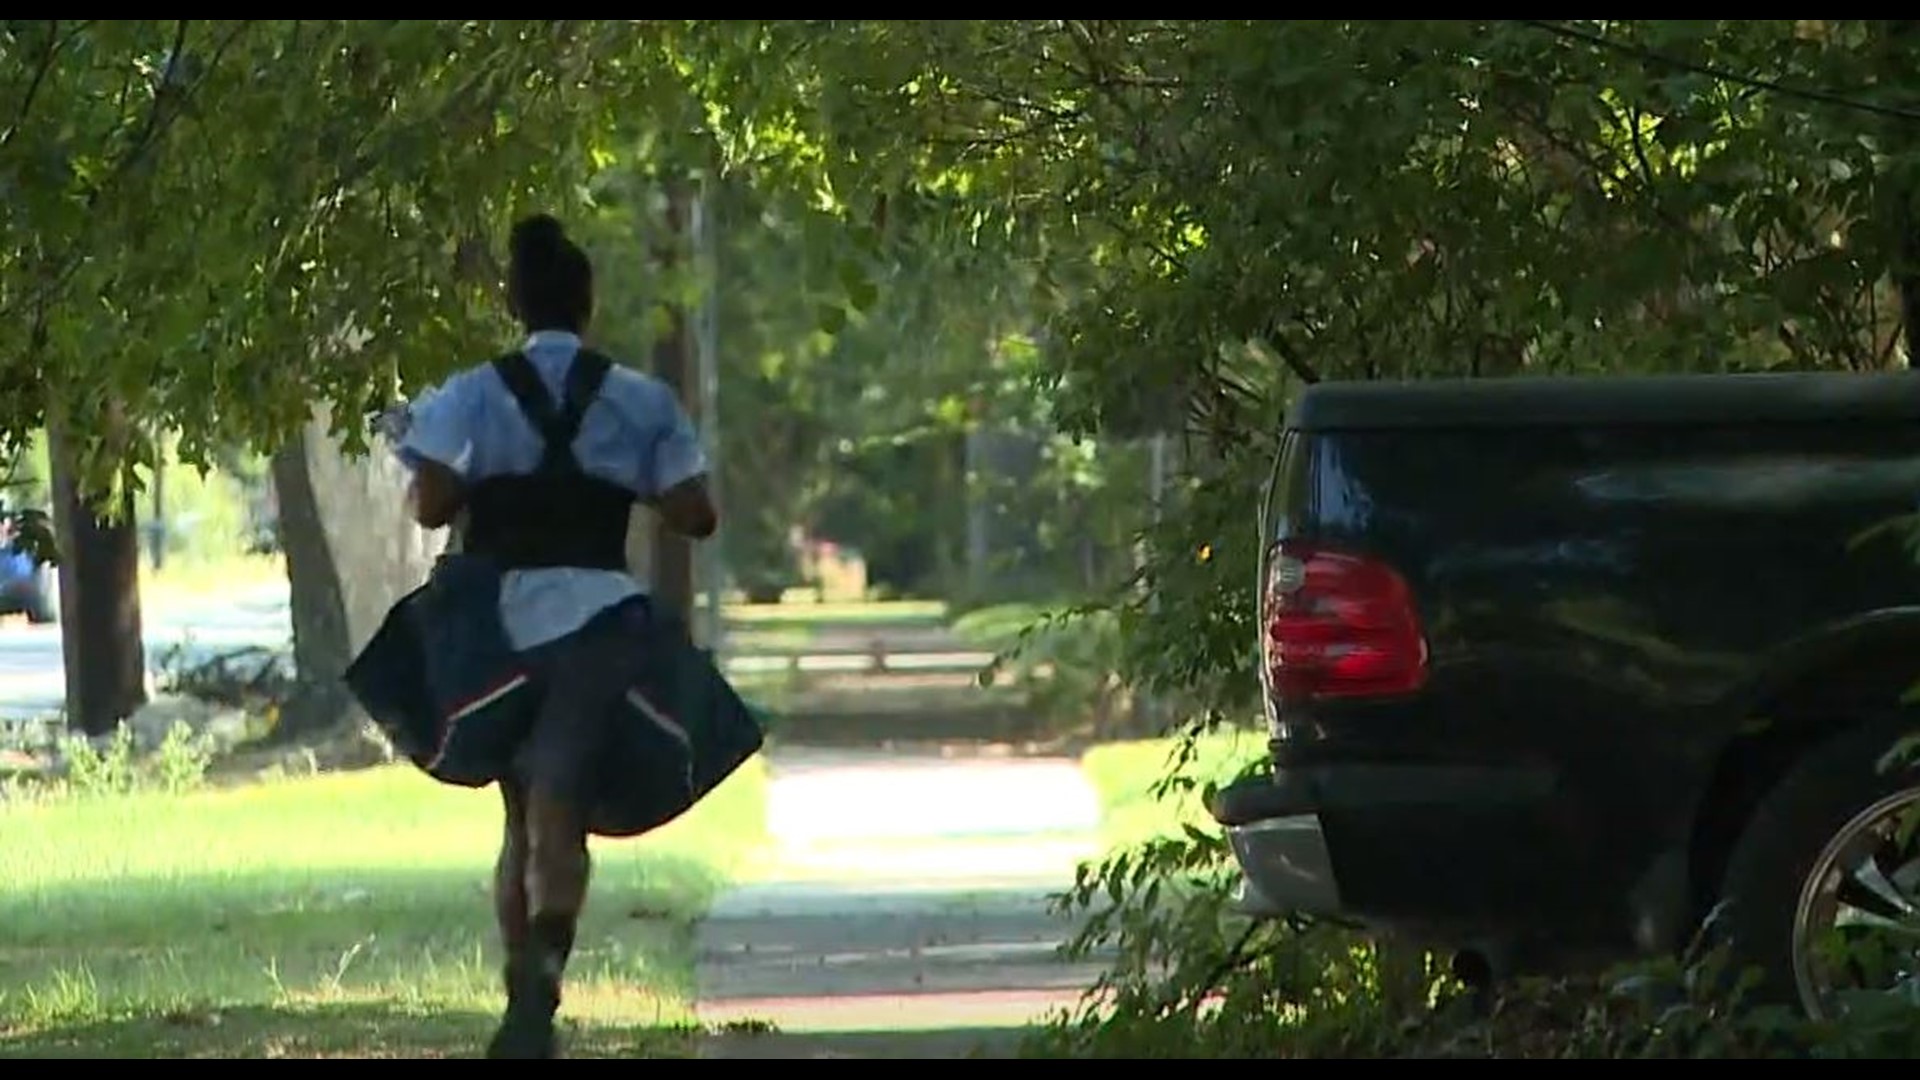 Texas mail carrier delivers inspiration by running route